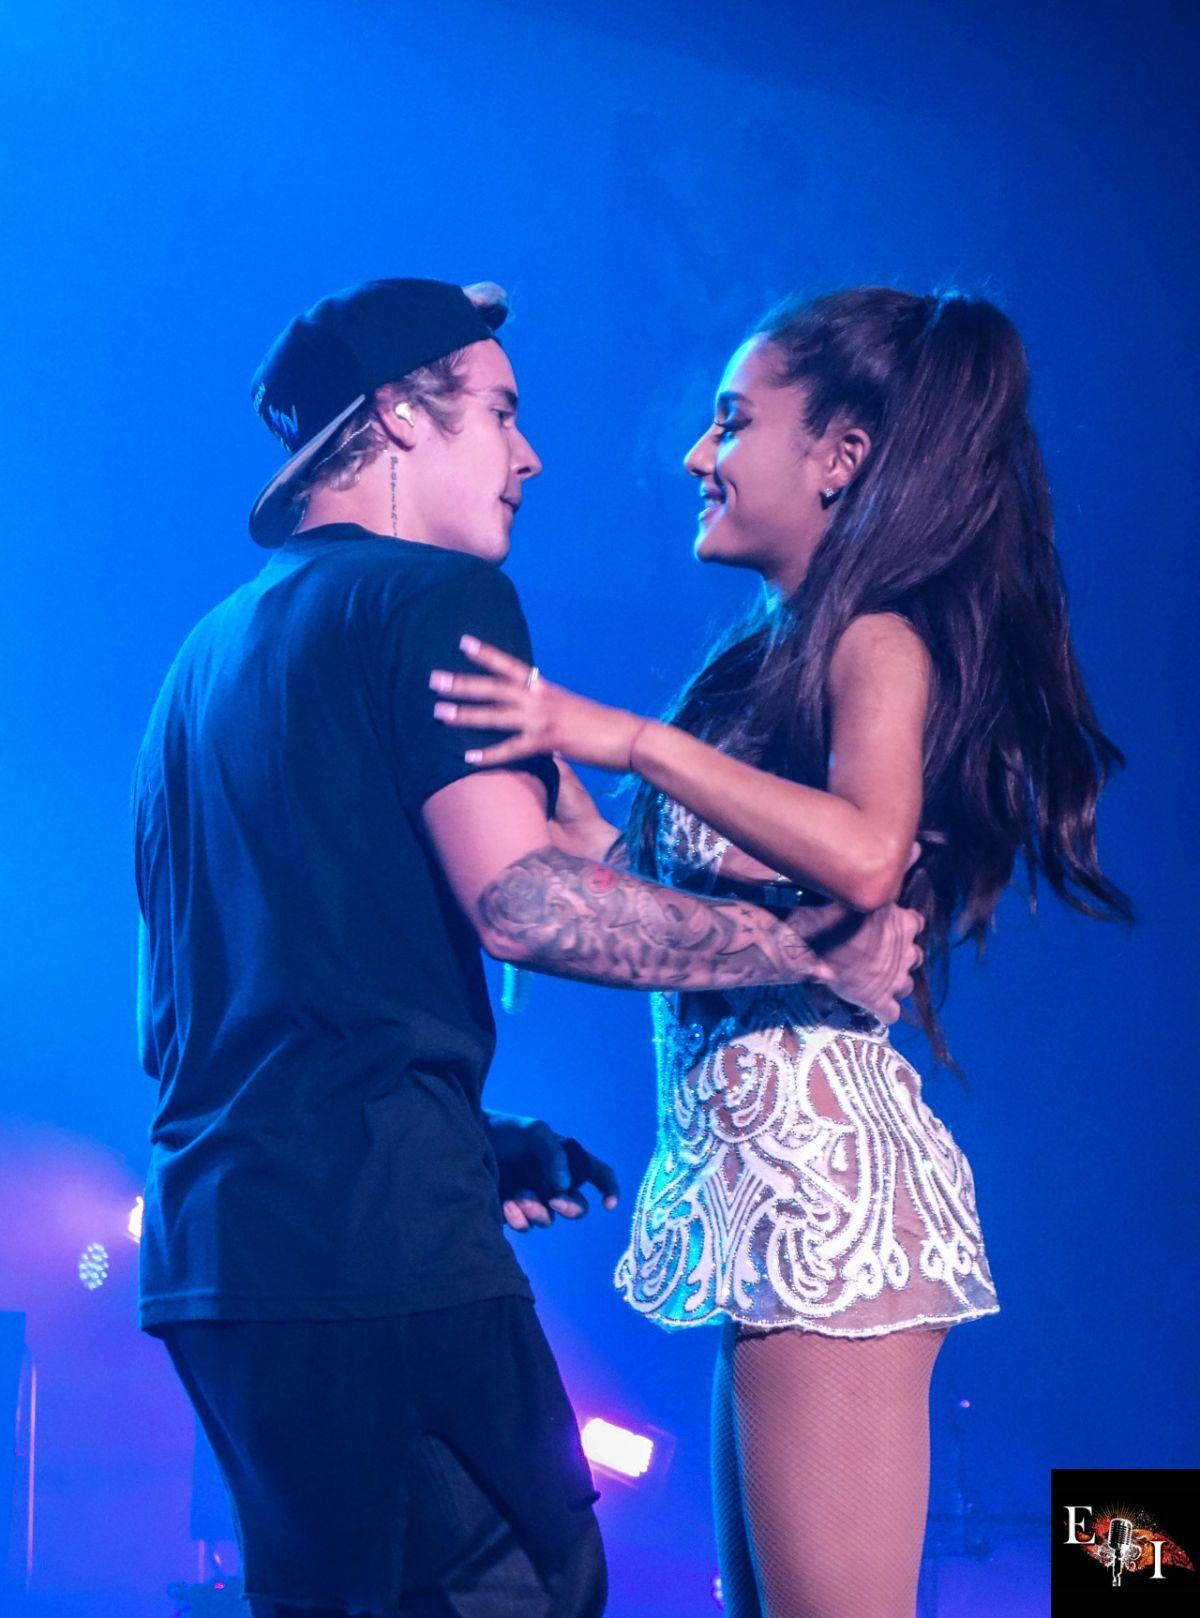 Ariana Grande & Justin Bieber on stage at the Honeymoon Tour. ღ